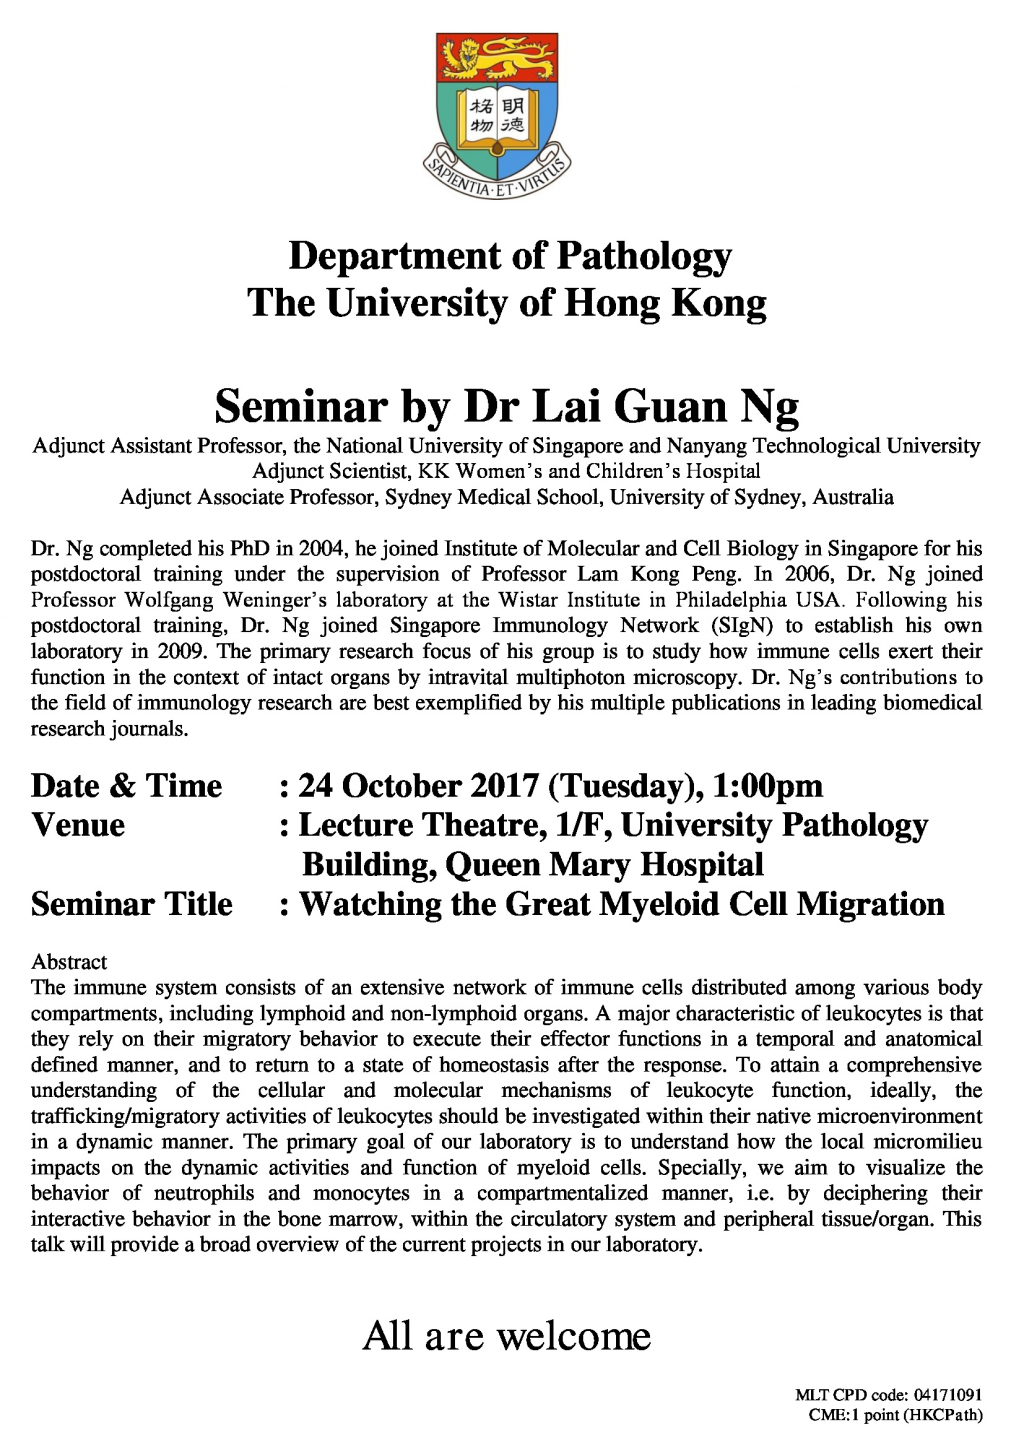 A Seminar on Watching the Great Myeloid Cell Migration by Dr Dr Lai Guan Ng on 24 Oct 2017 (1 pm)